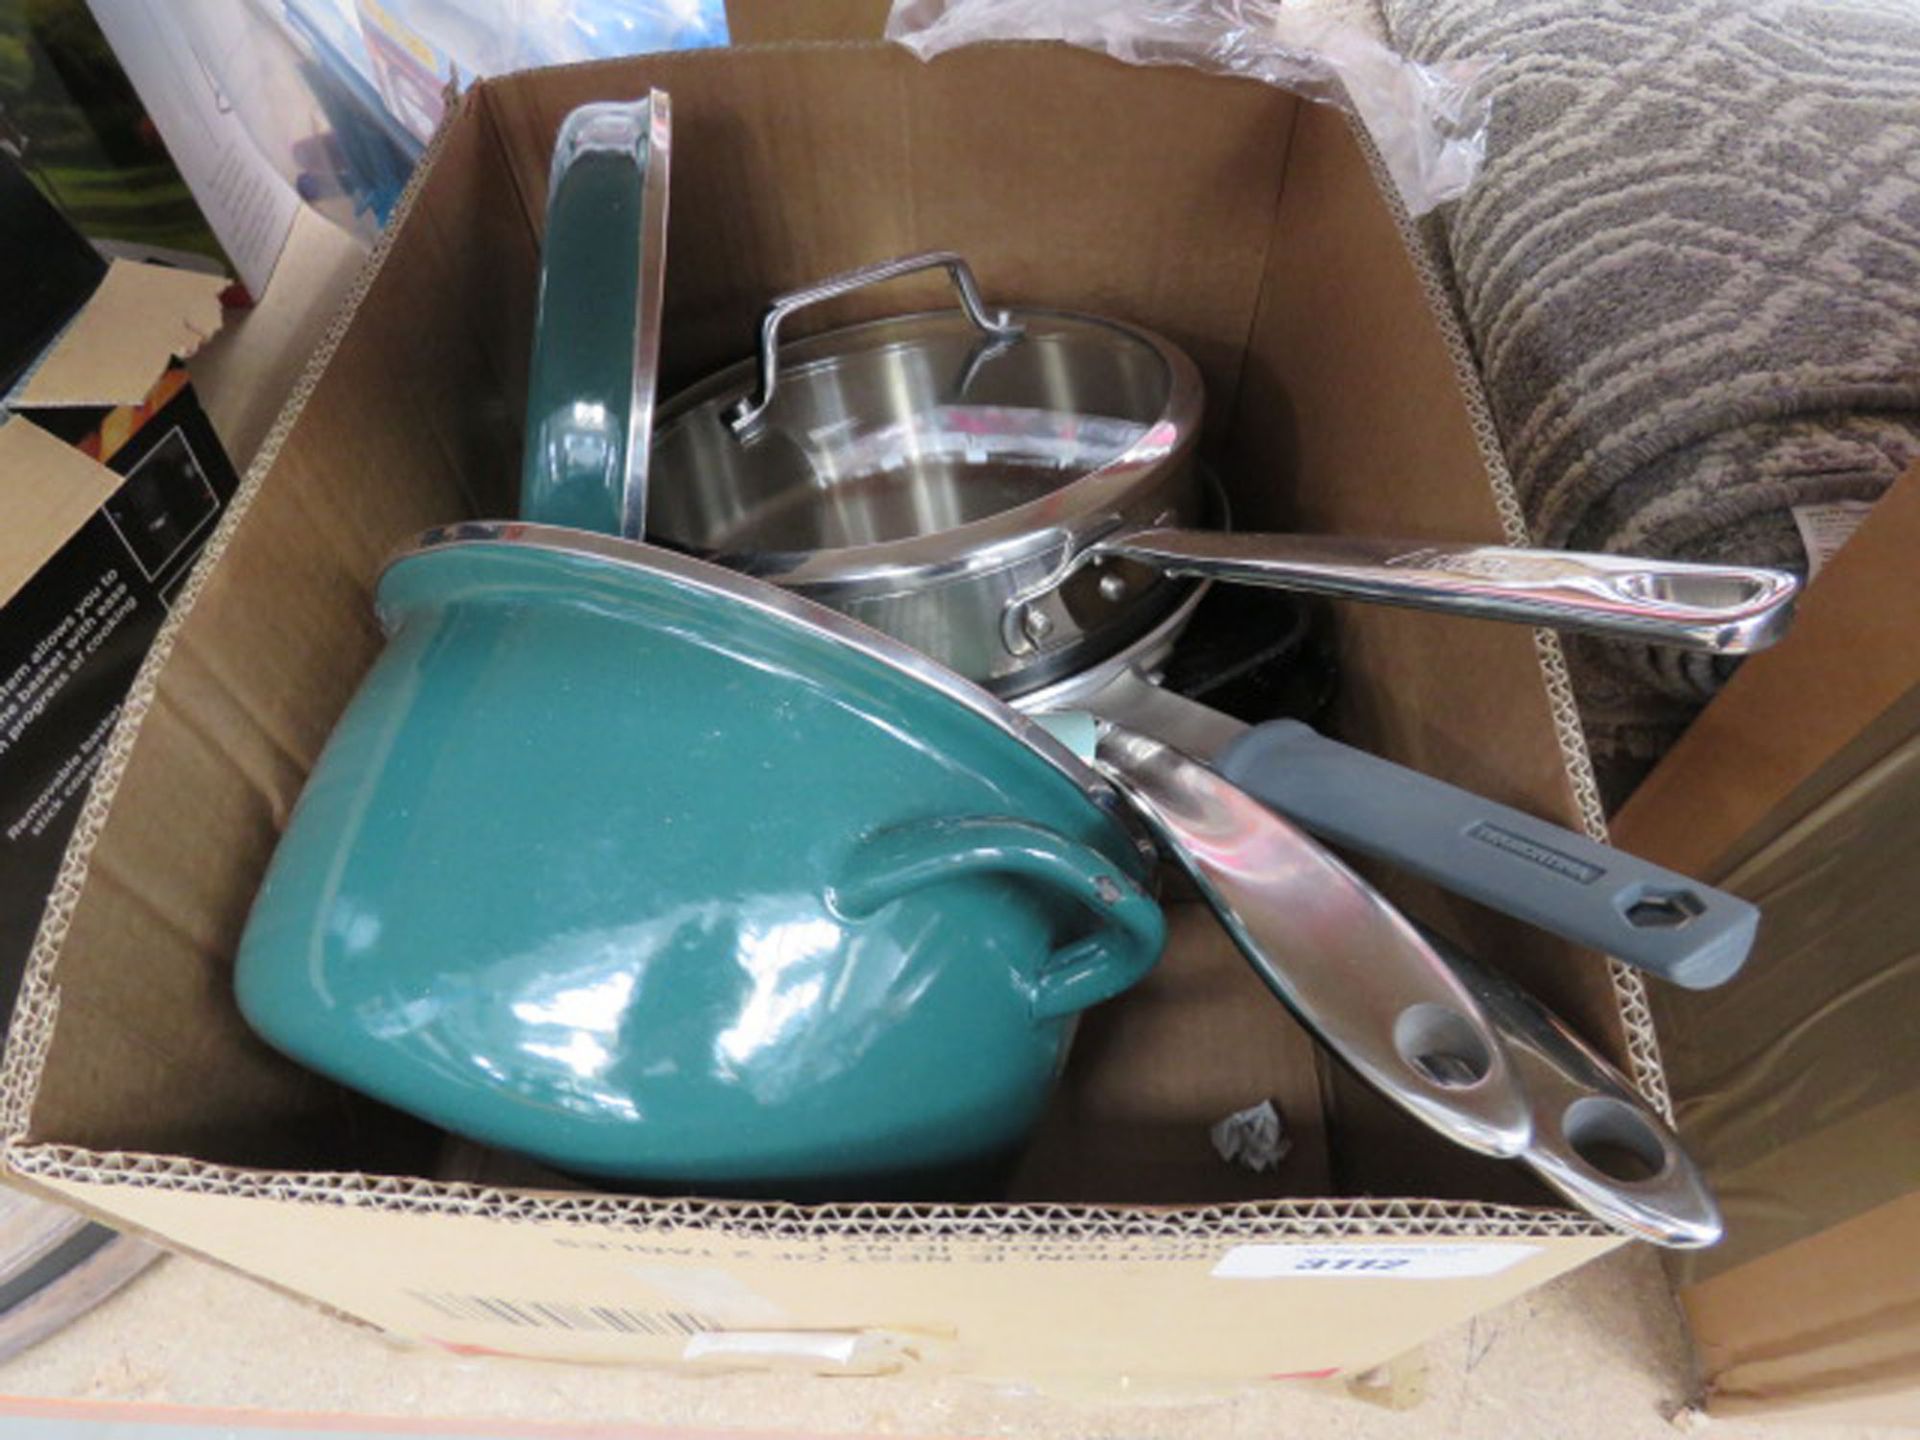 Box containing pots and pans (used)